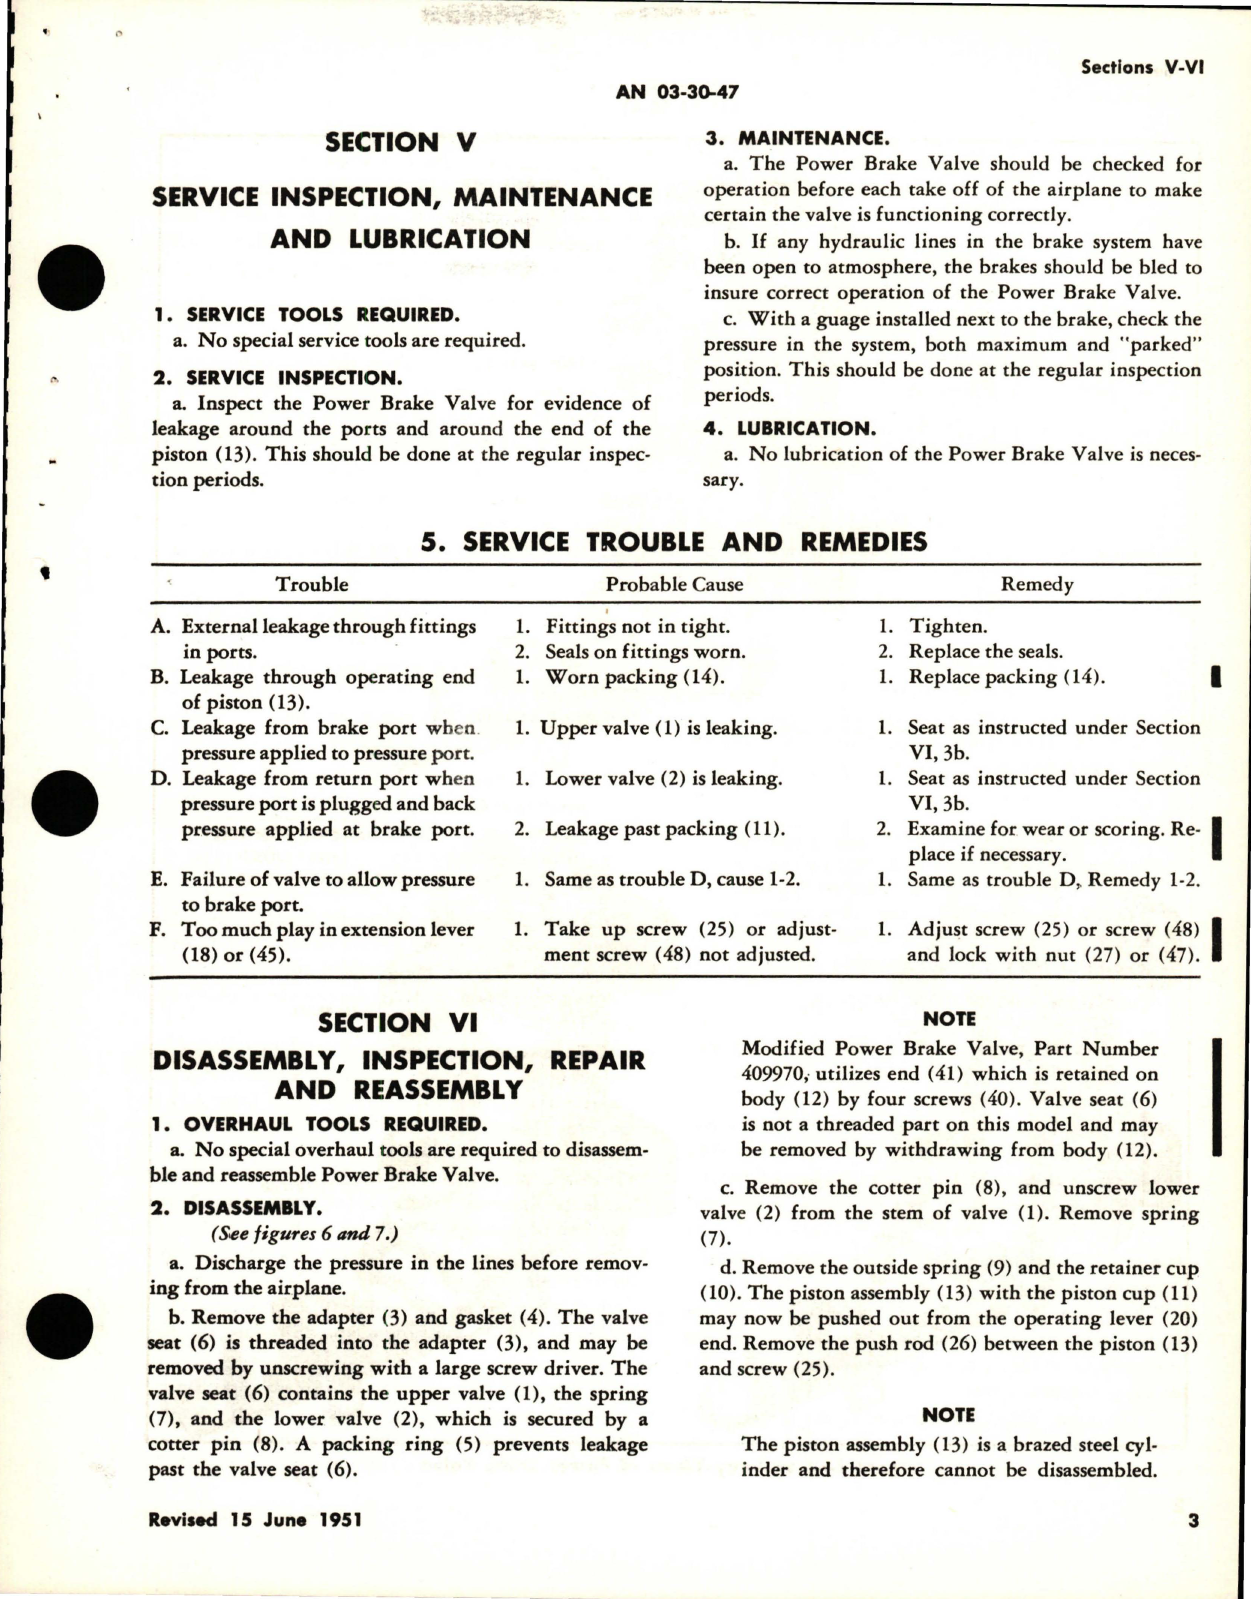 Sample page 7 from AirCorps Library document: Operation, Service, and Overhaul Instructions with Parts Catalog for Power Brake Valves